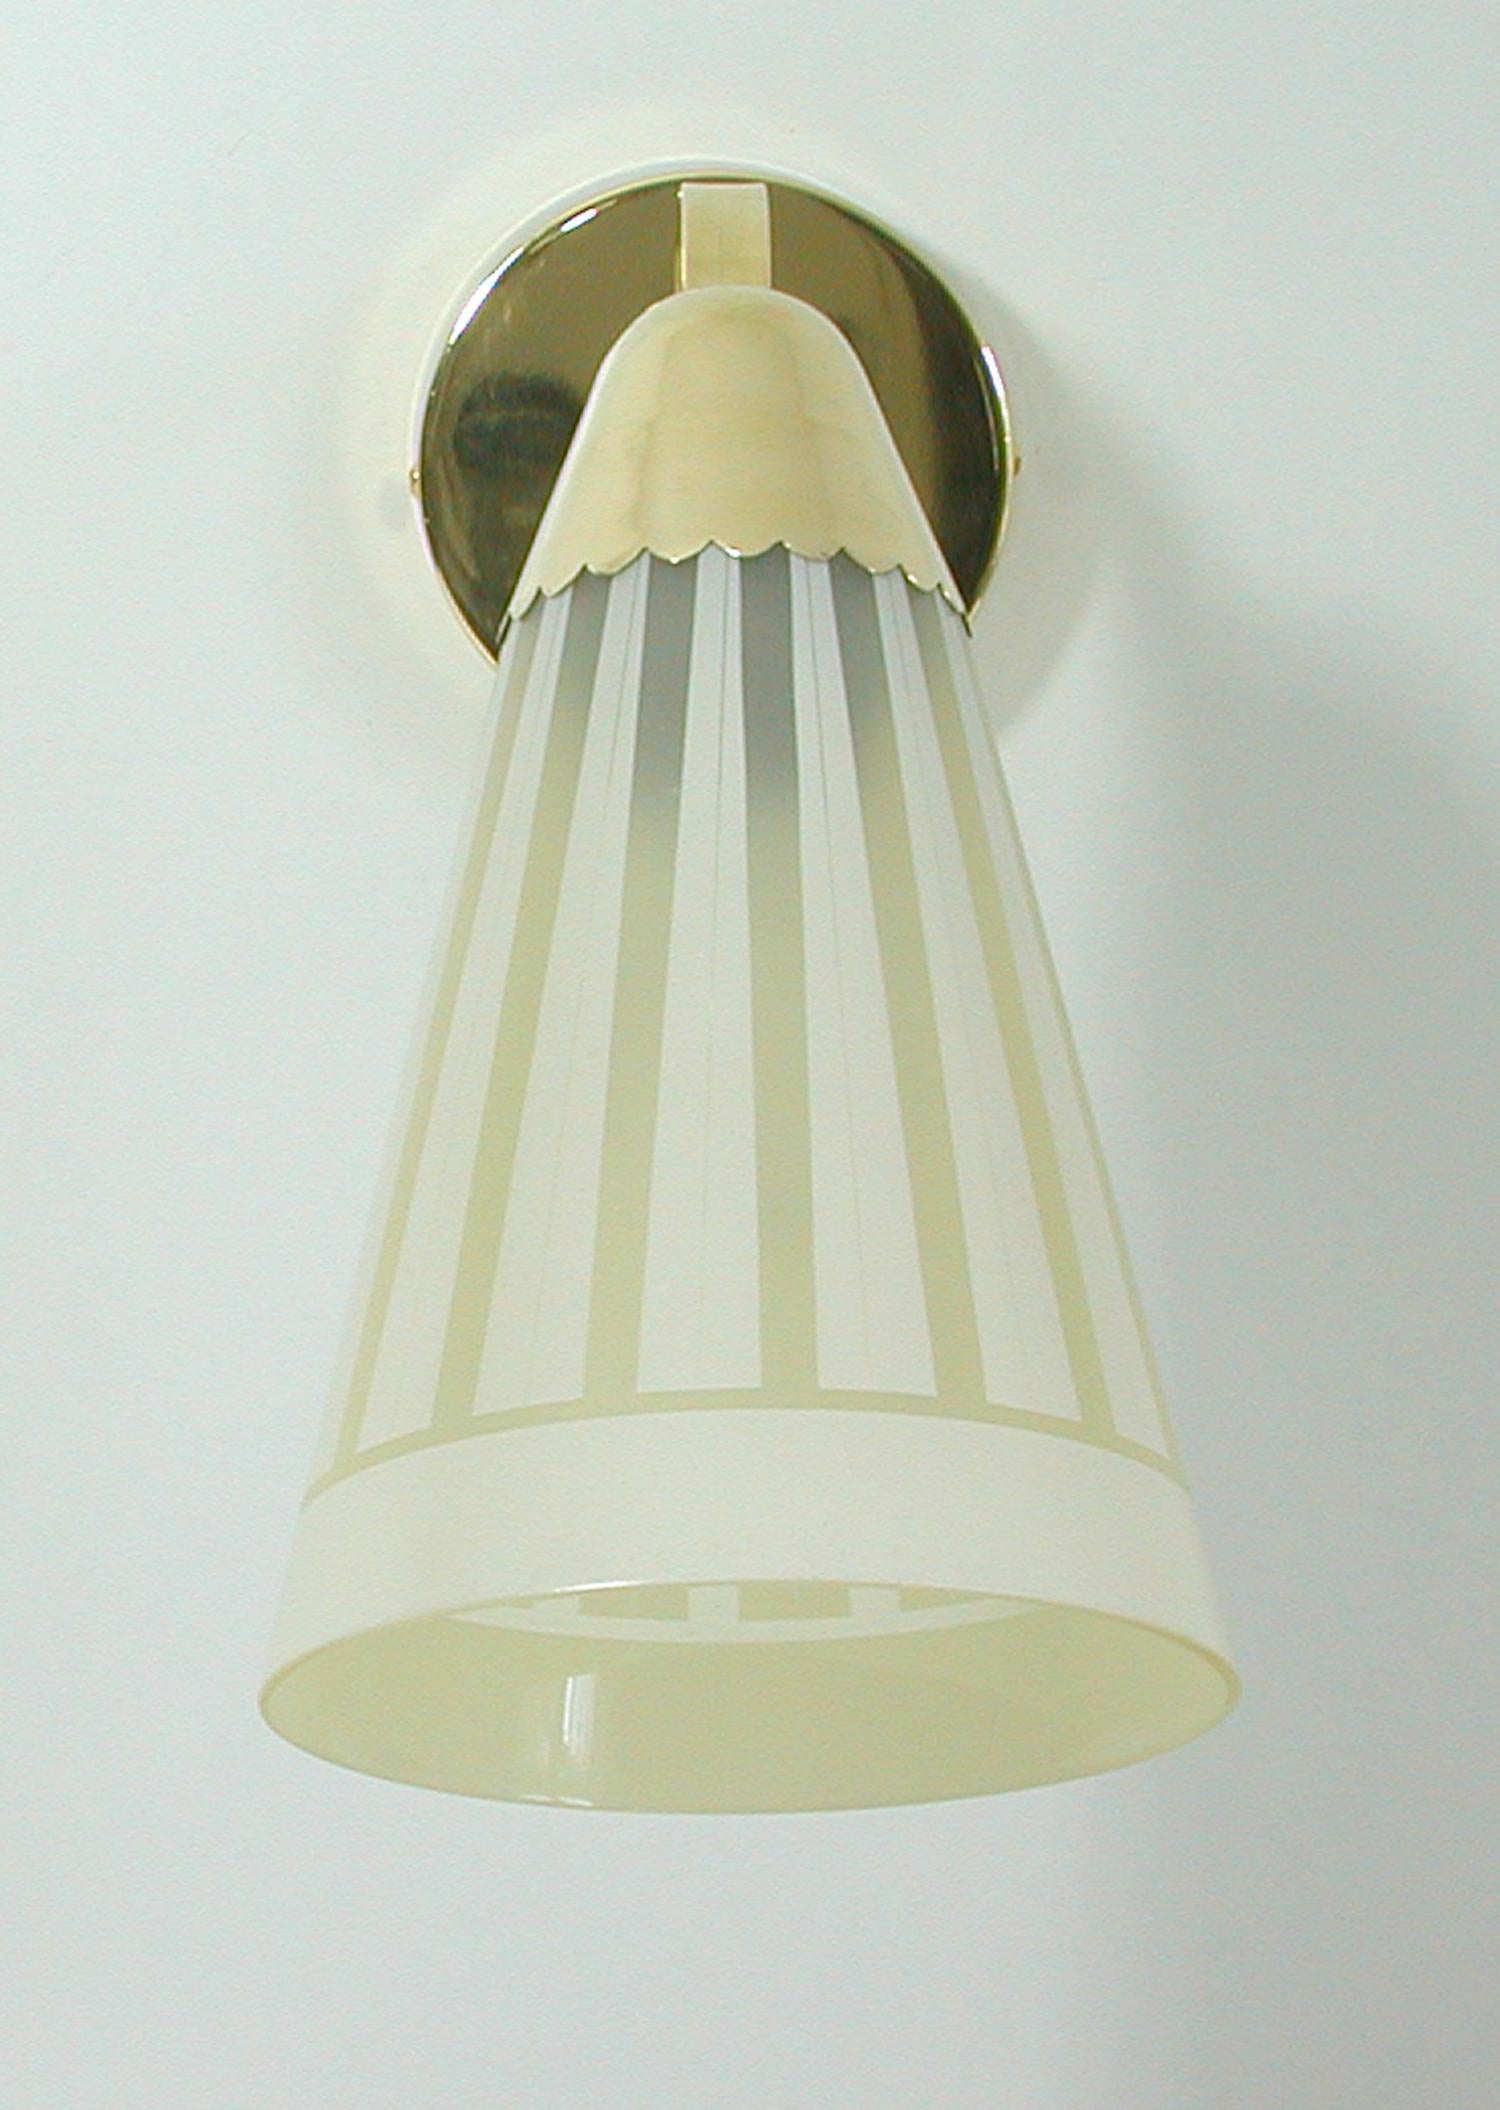 Midcentury German Brass and Glass Wall Light Sconce 1950s For Sale 2